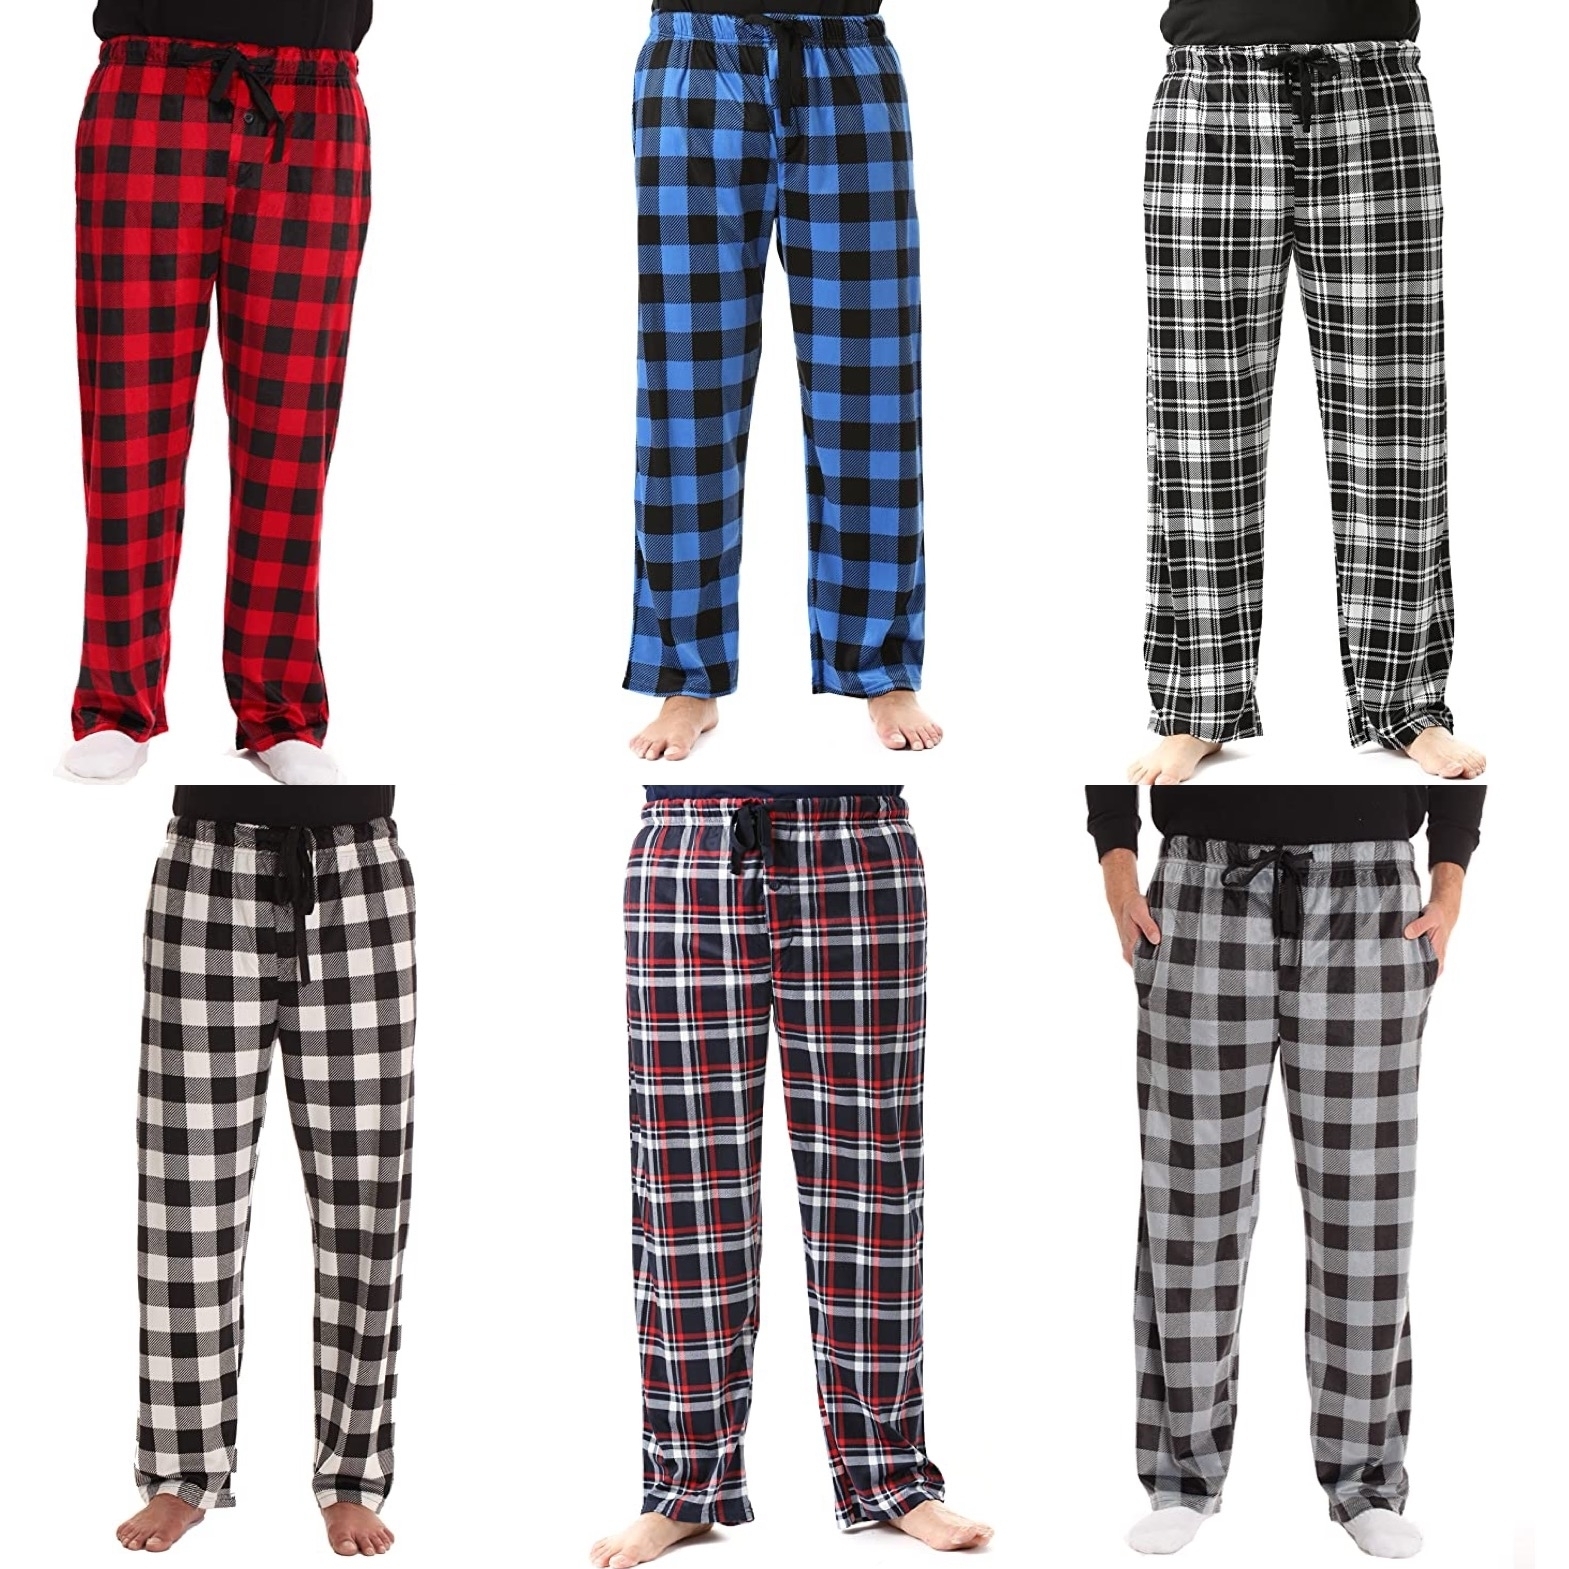 Multi-Pack: Men's Ultra Soft Flannel Plaid Pajama Lounge Pants - 1-Pack, XX-Large